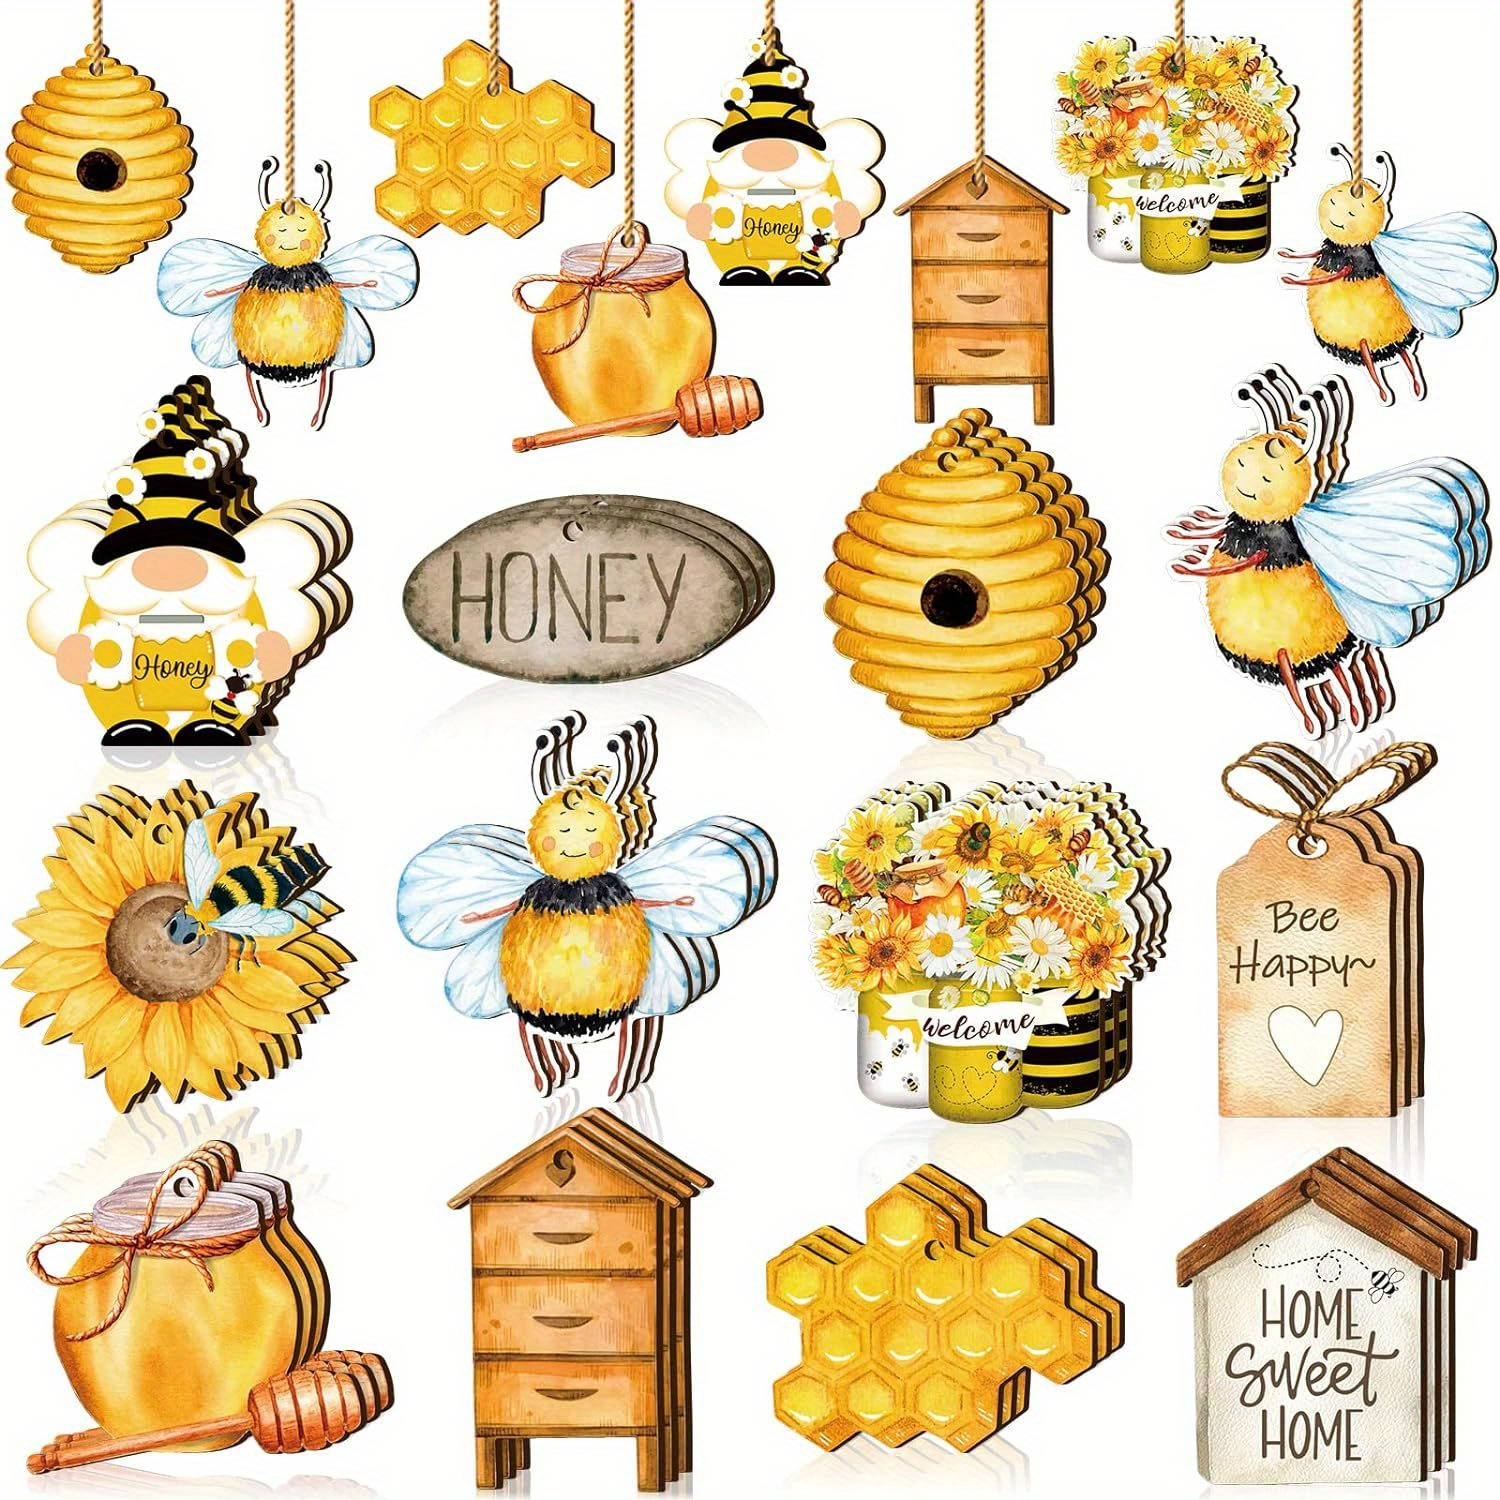 

24pcs/set Wooden Hanging Spring Yellow Bee Sunflower Decorations Gift Pendant For Courtyard Window Festival Party Supplies (with Rope)